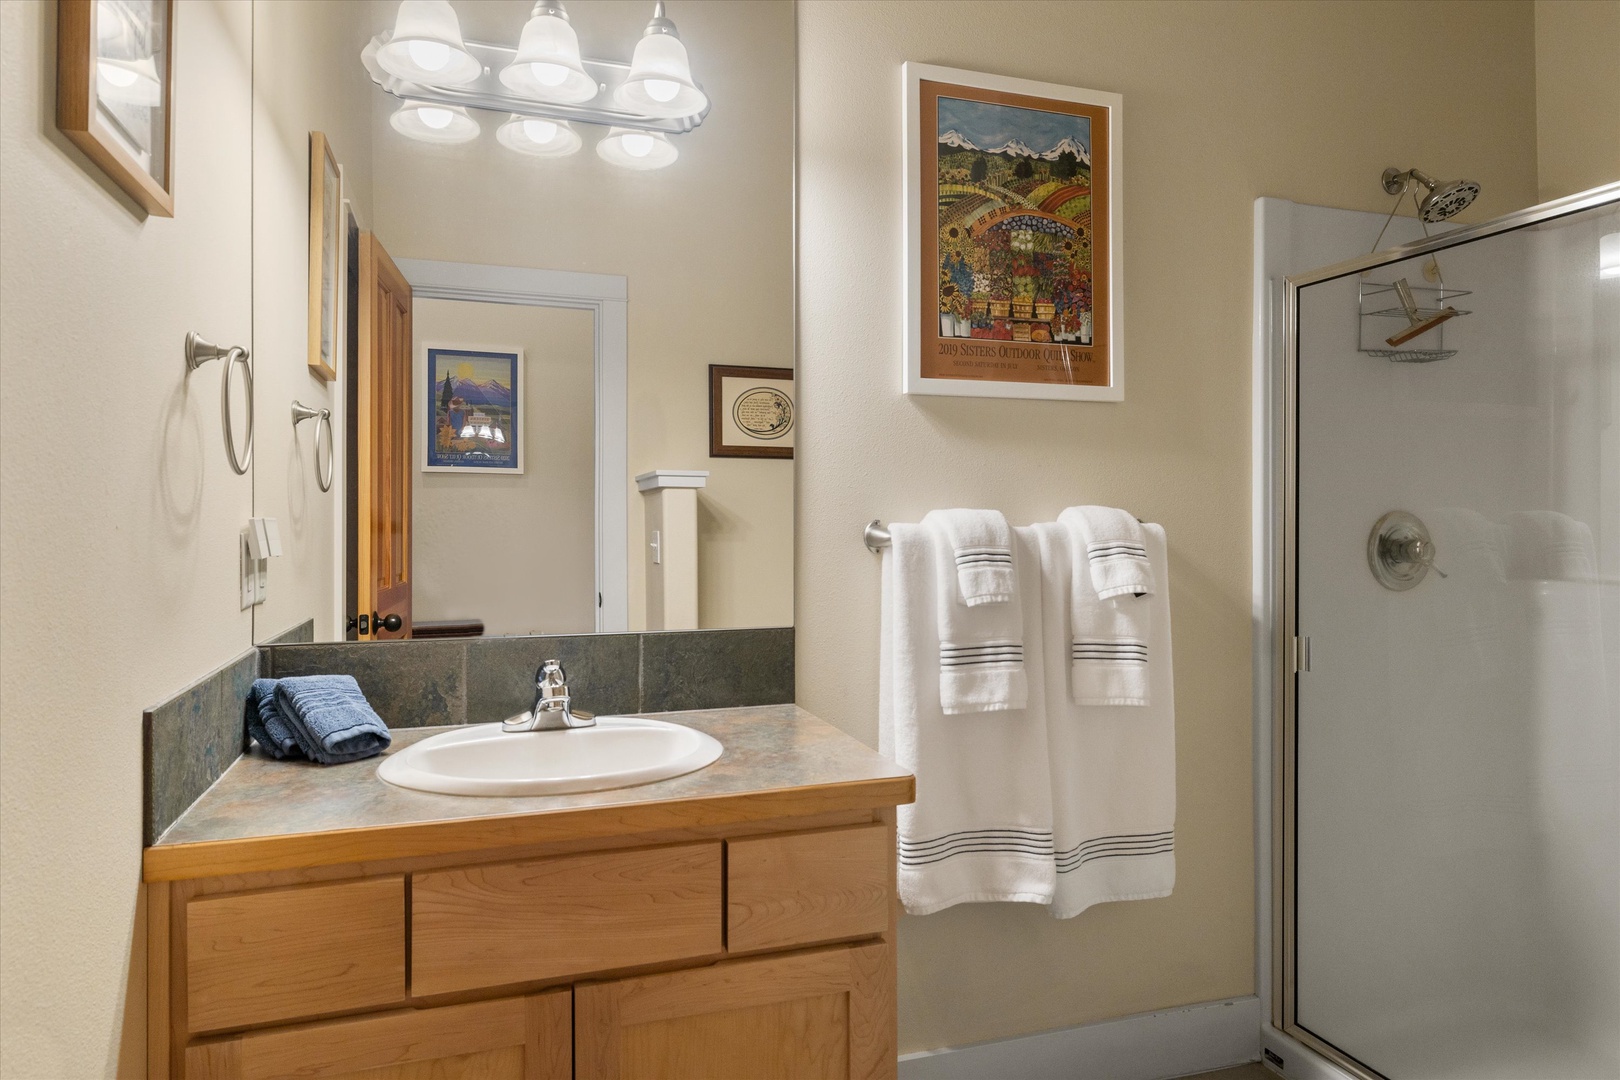 The final full bath features a single vanity, glass shower, and washer/dryer